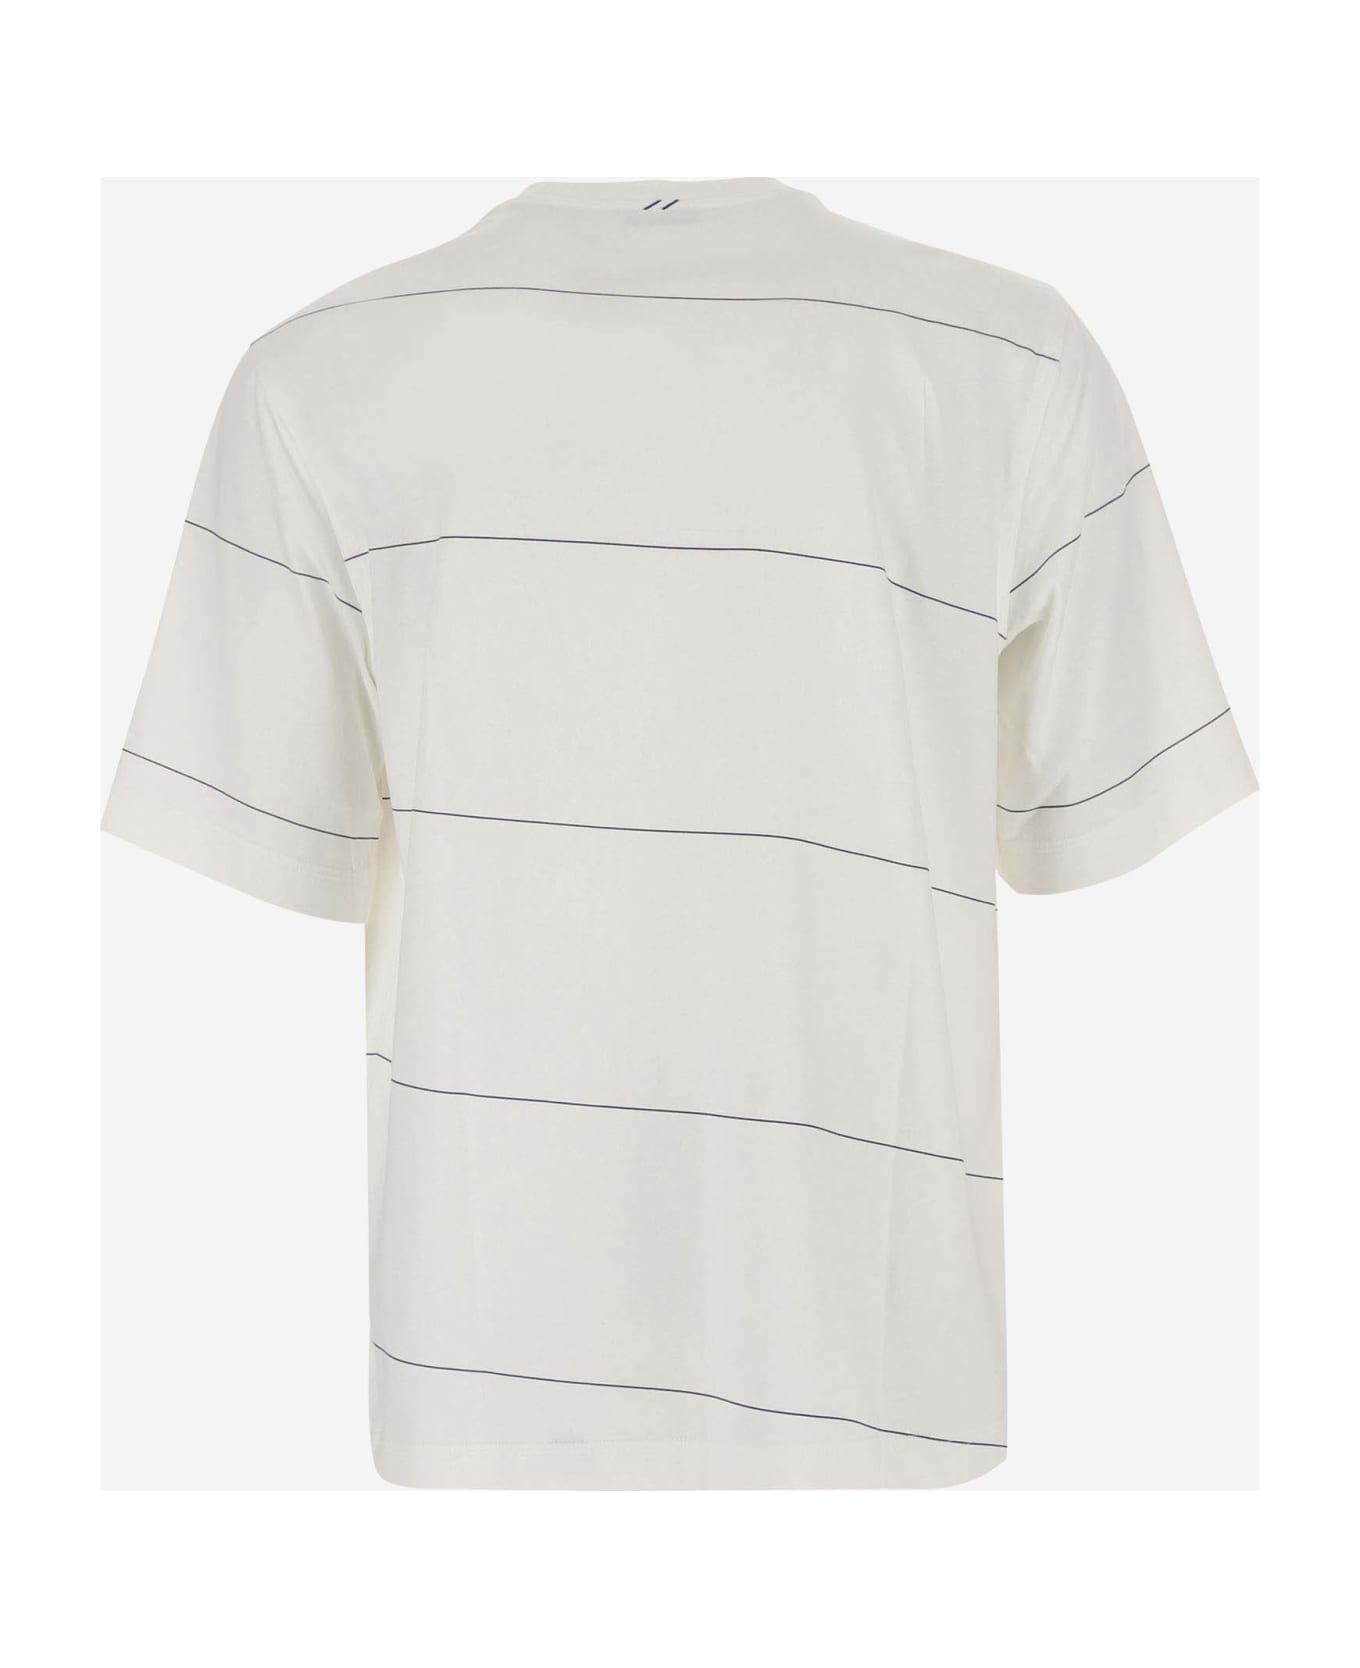 Burberry Cotton T-shirt With Striped Pattern - White シャツ